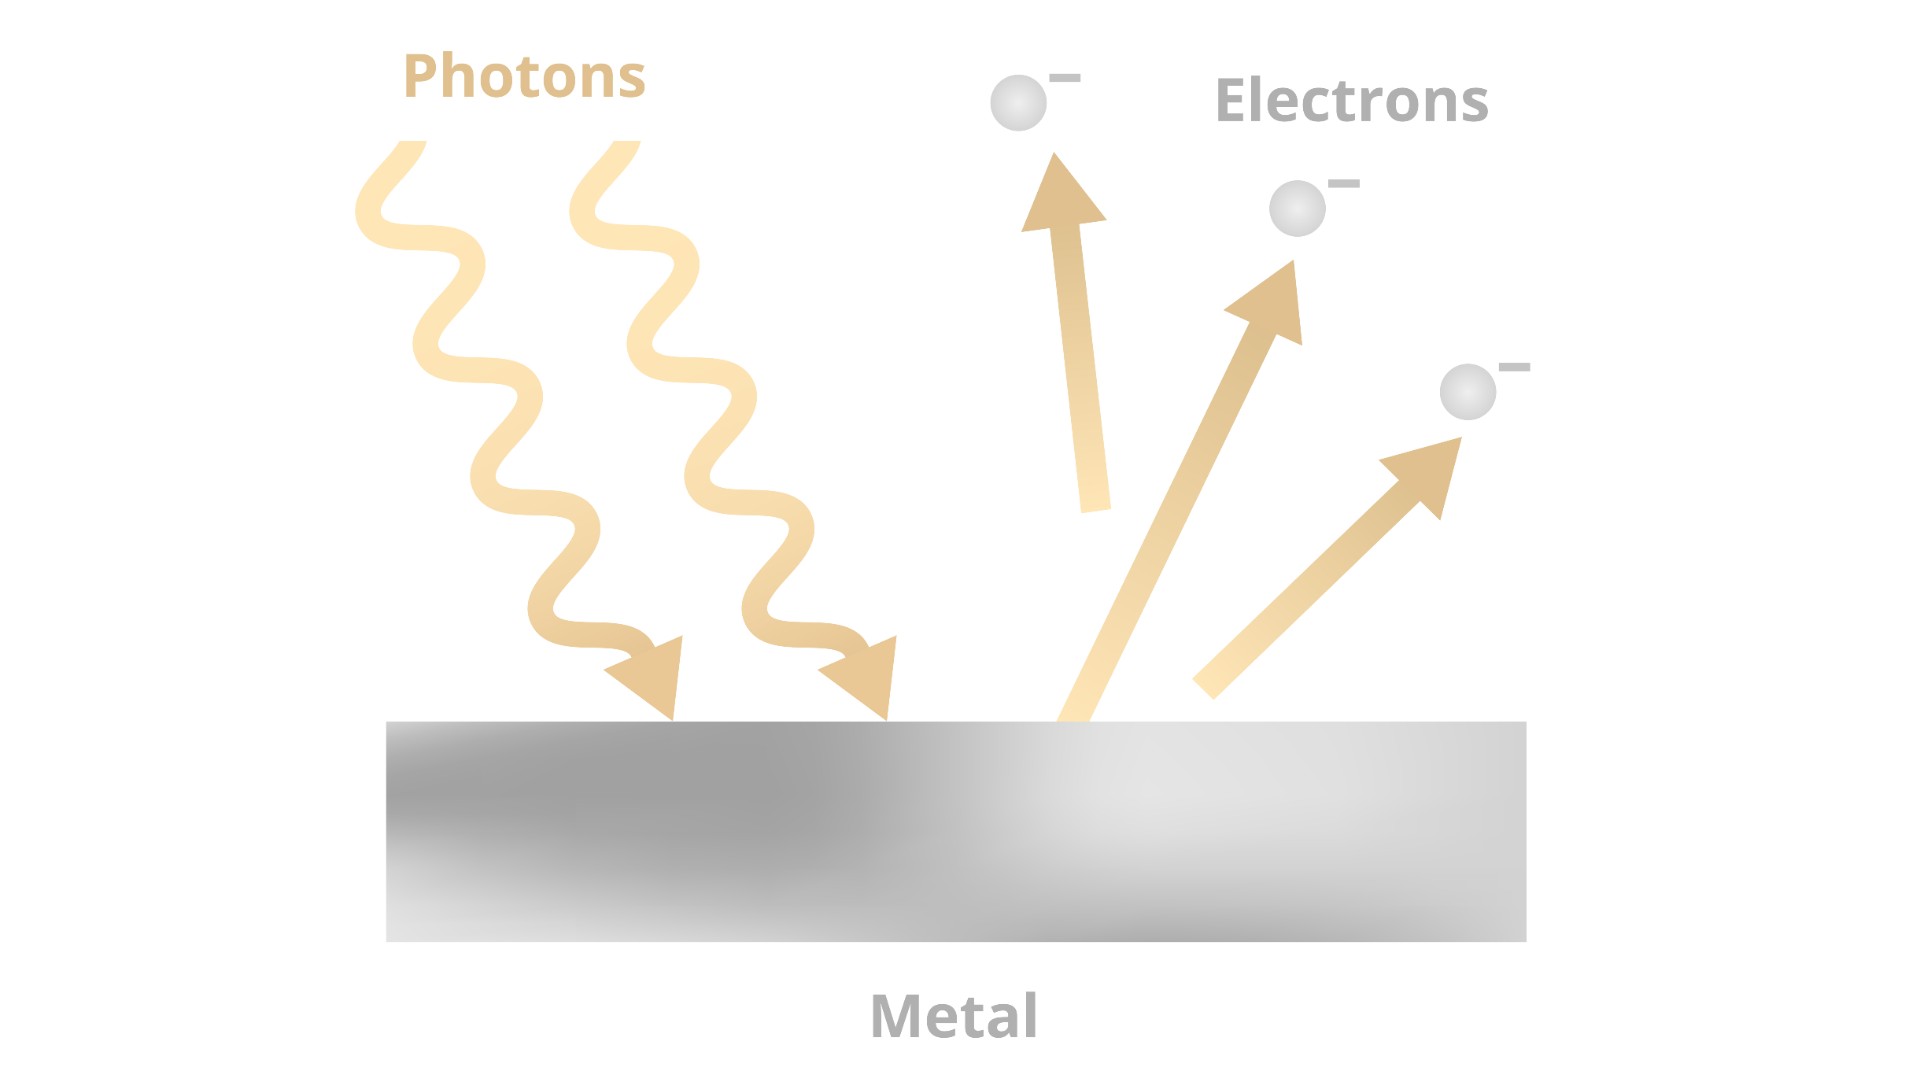 Photoelectric effect - emission of electrons when photons hit a metal surface. petrroudny via Getty Images